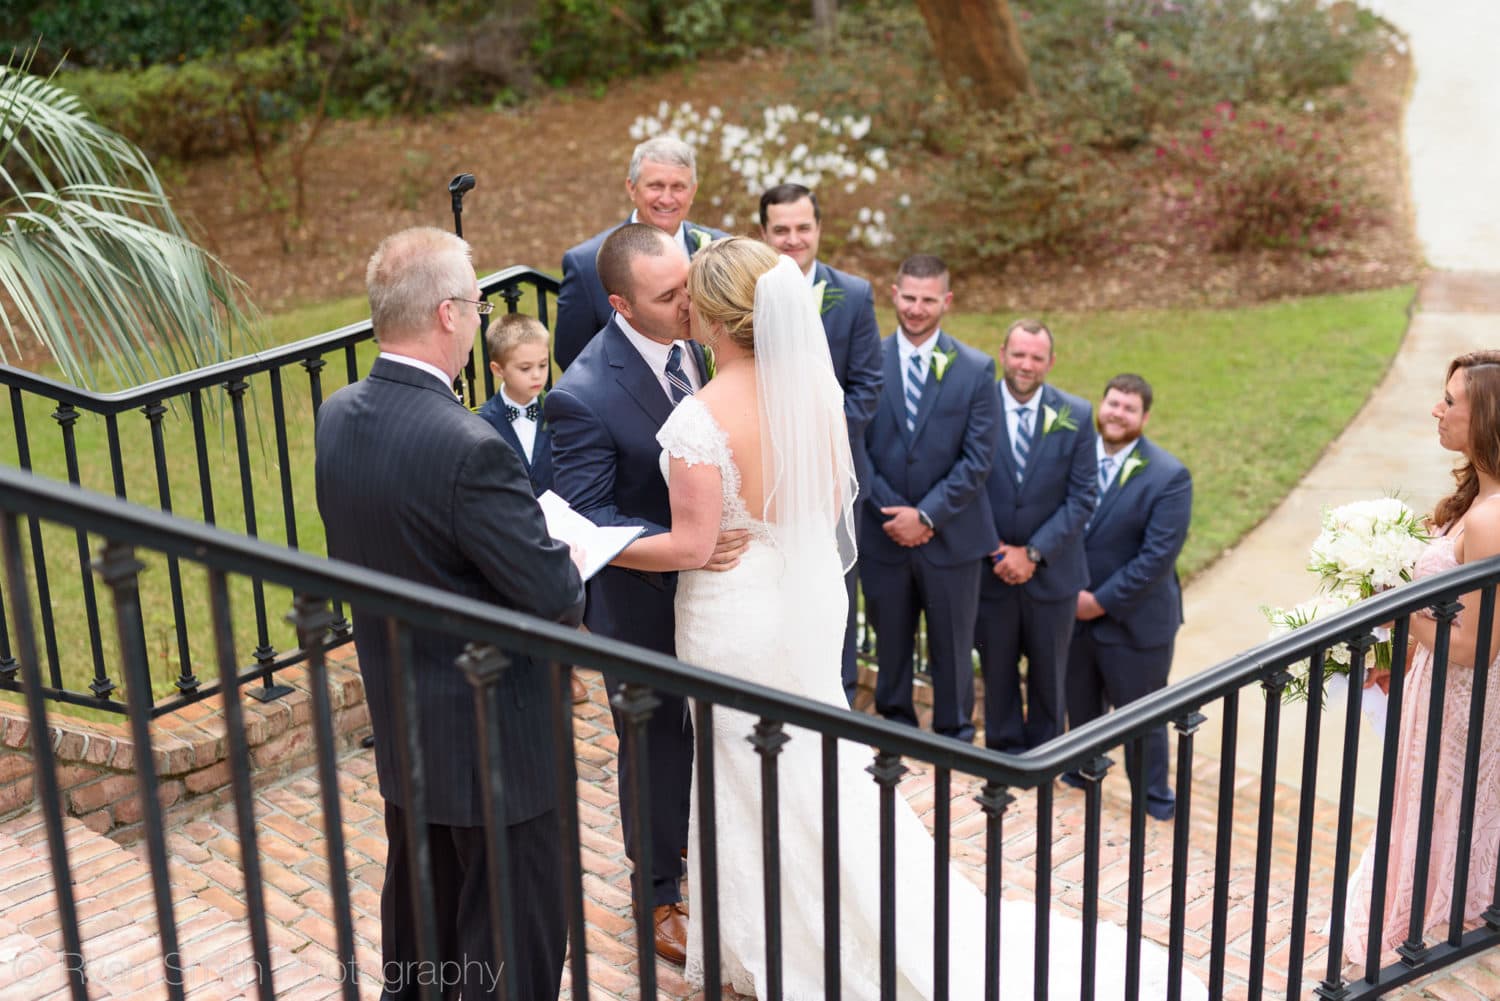 First kiss shot by my assistant - Pawleys Plantation